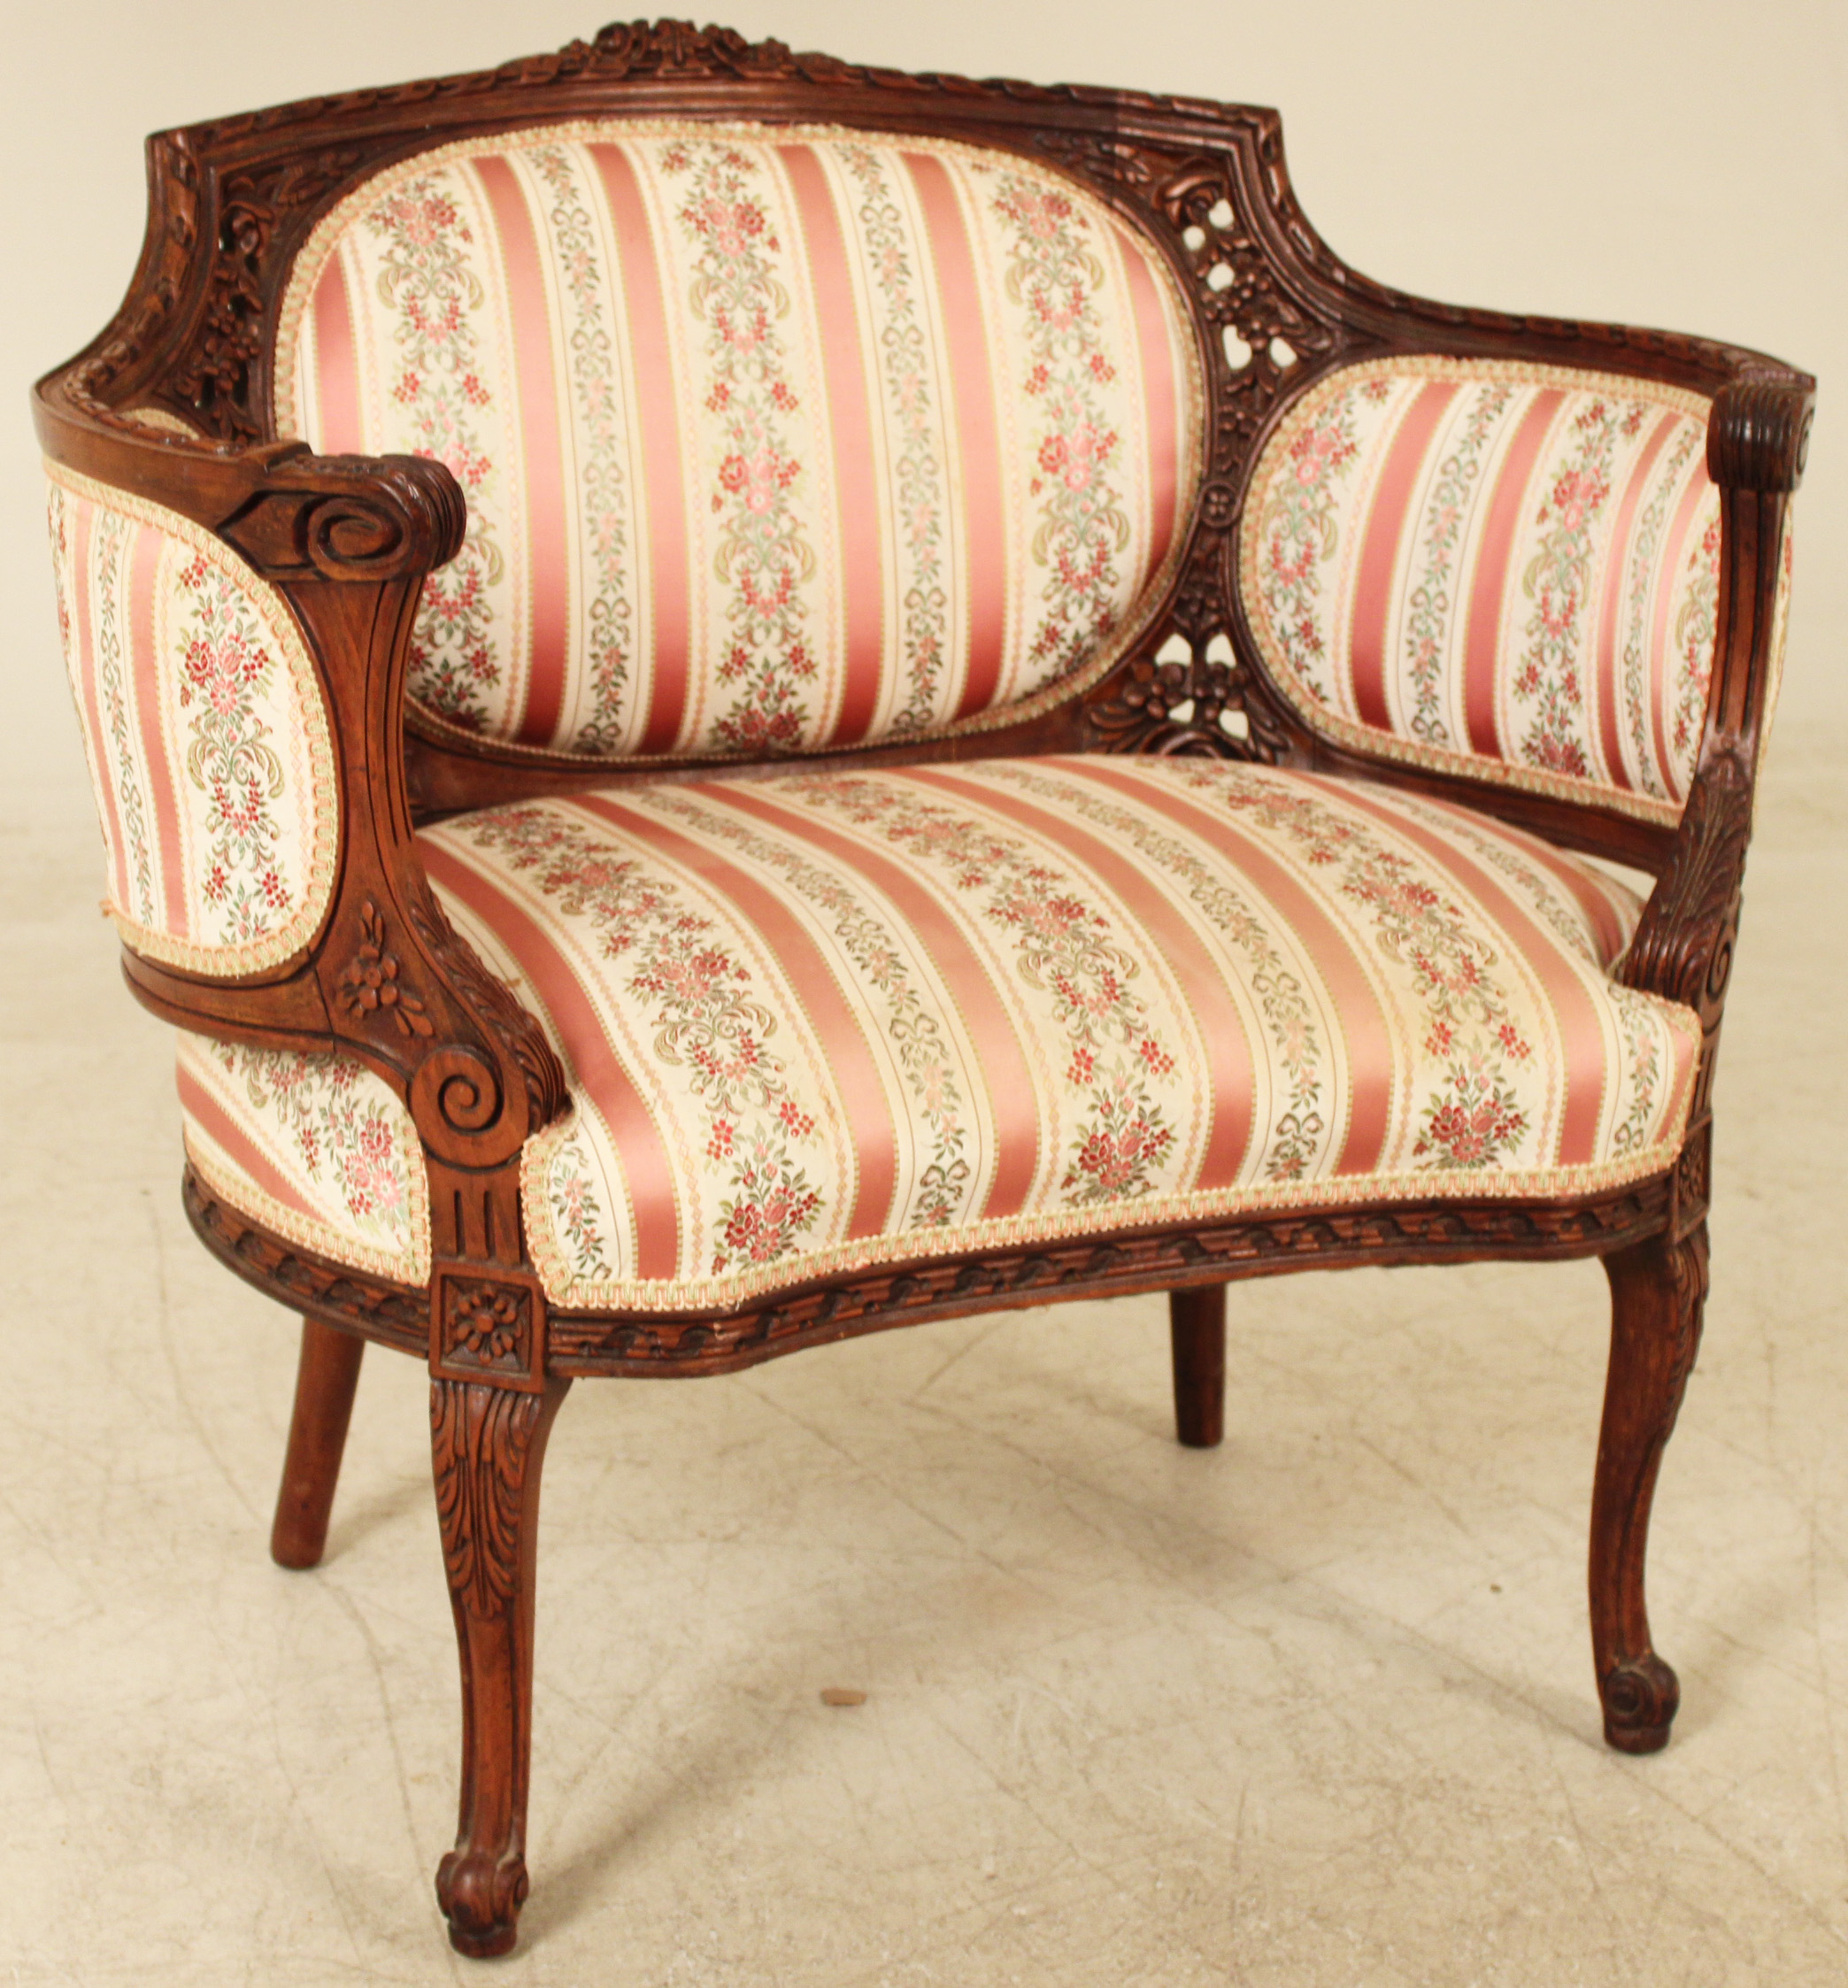 LOUIS XV STYLE CARVED WALNUT MARQUIS 35f64a